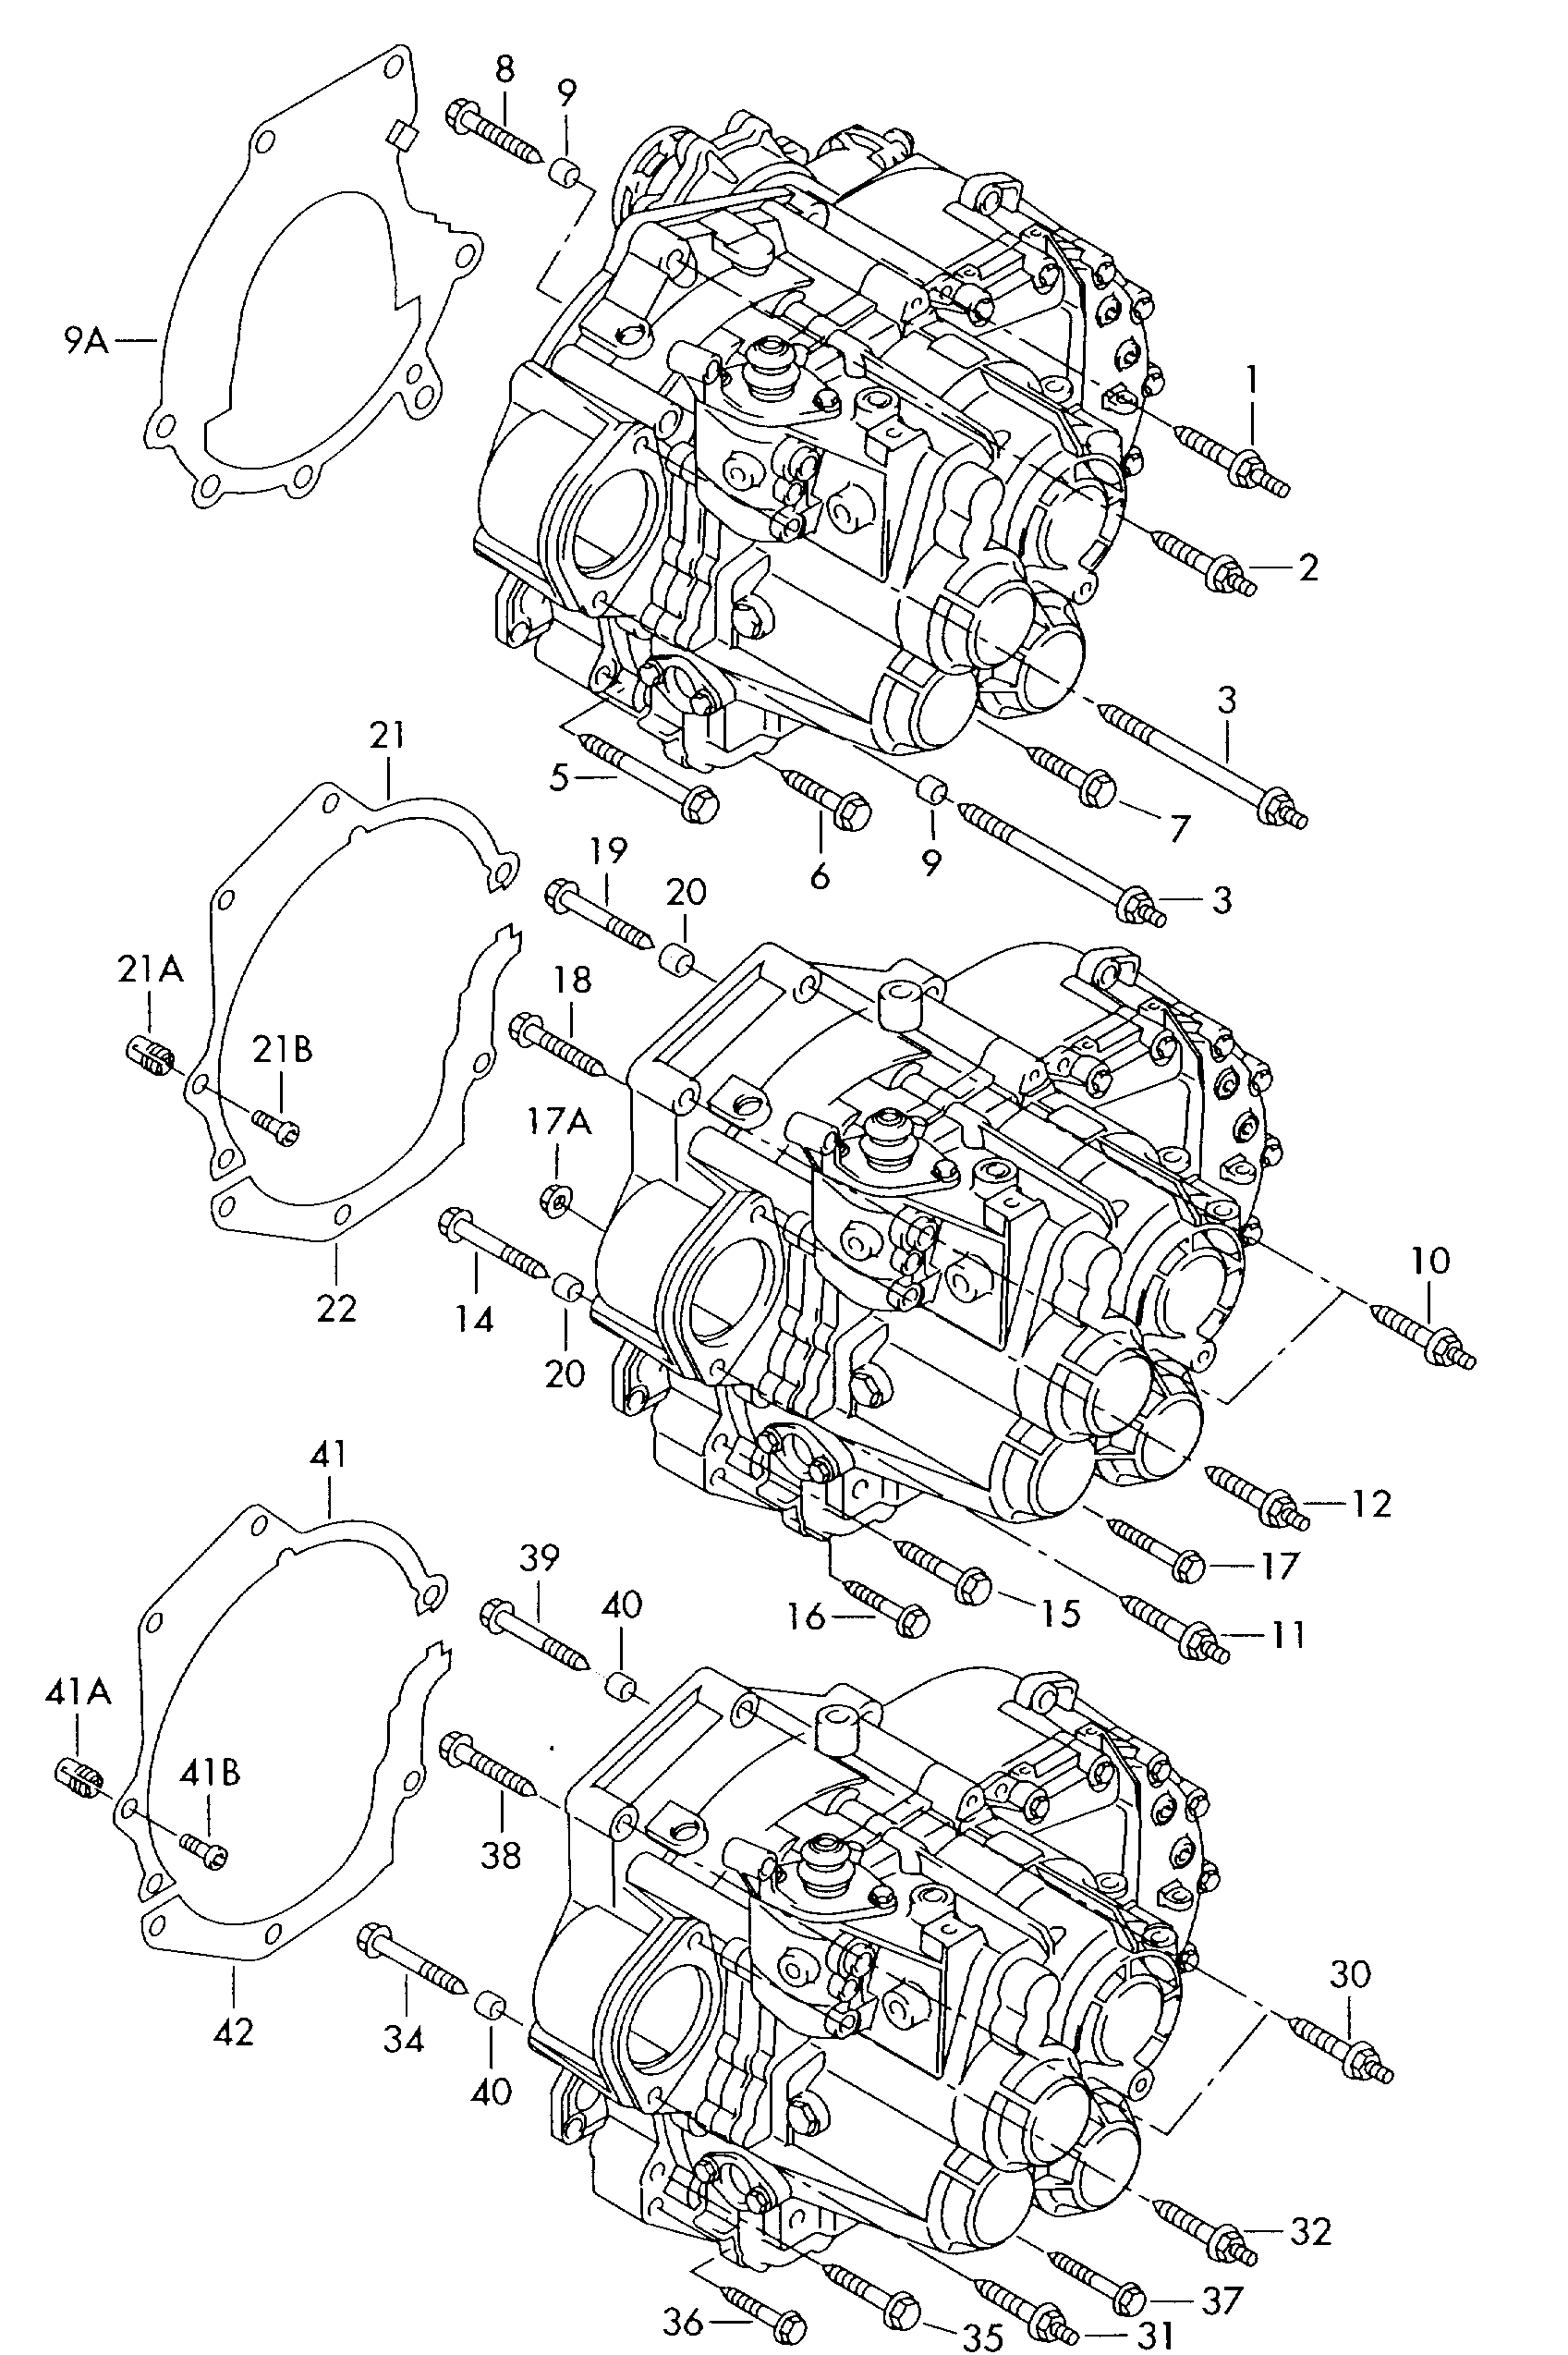 mounting parts for engine and<br>transmission6-speed manual transmissionfor four-wheel drive  - Octavia - oct